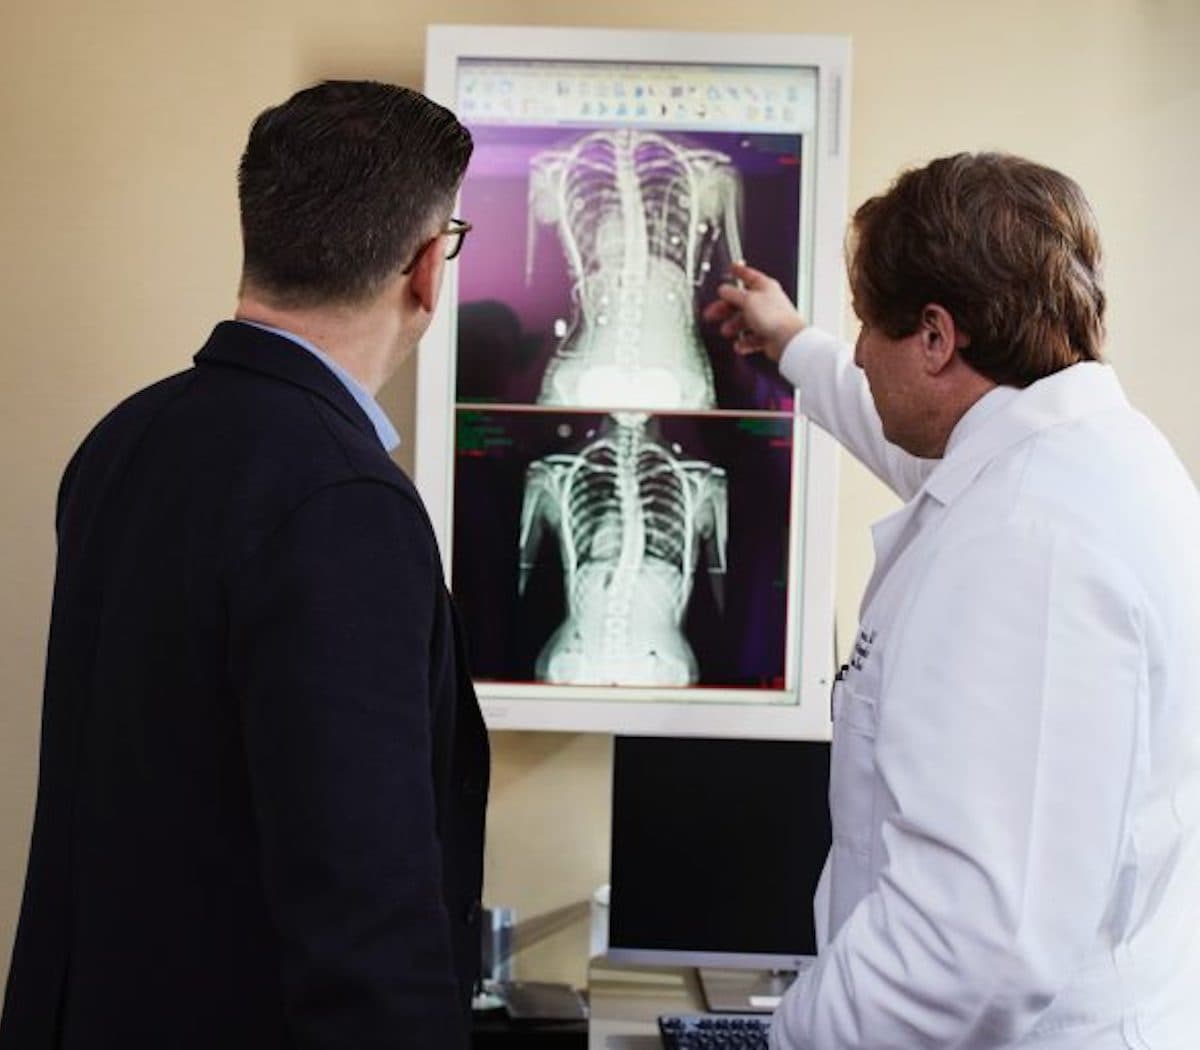 two doctors reviewing an x-ray